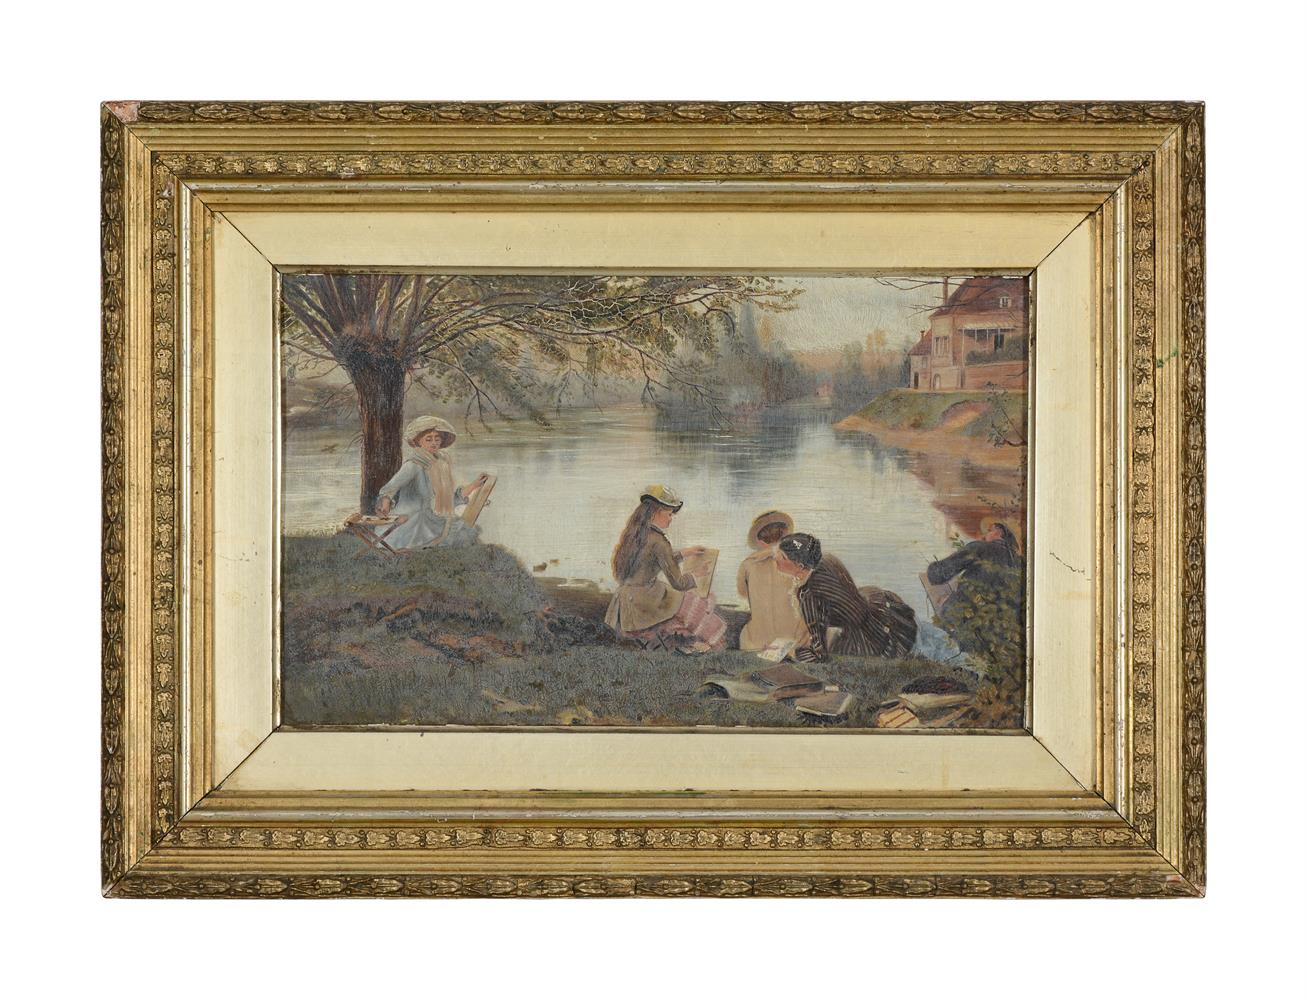 ENGLISH SCHOOL (19TH CENTURY), ARTIST SKETCHING BY THE RIVER - Image 2 of 4